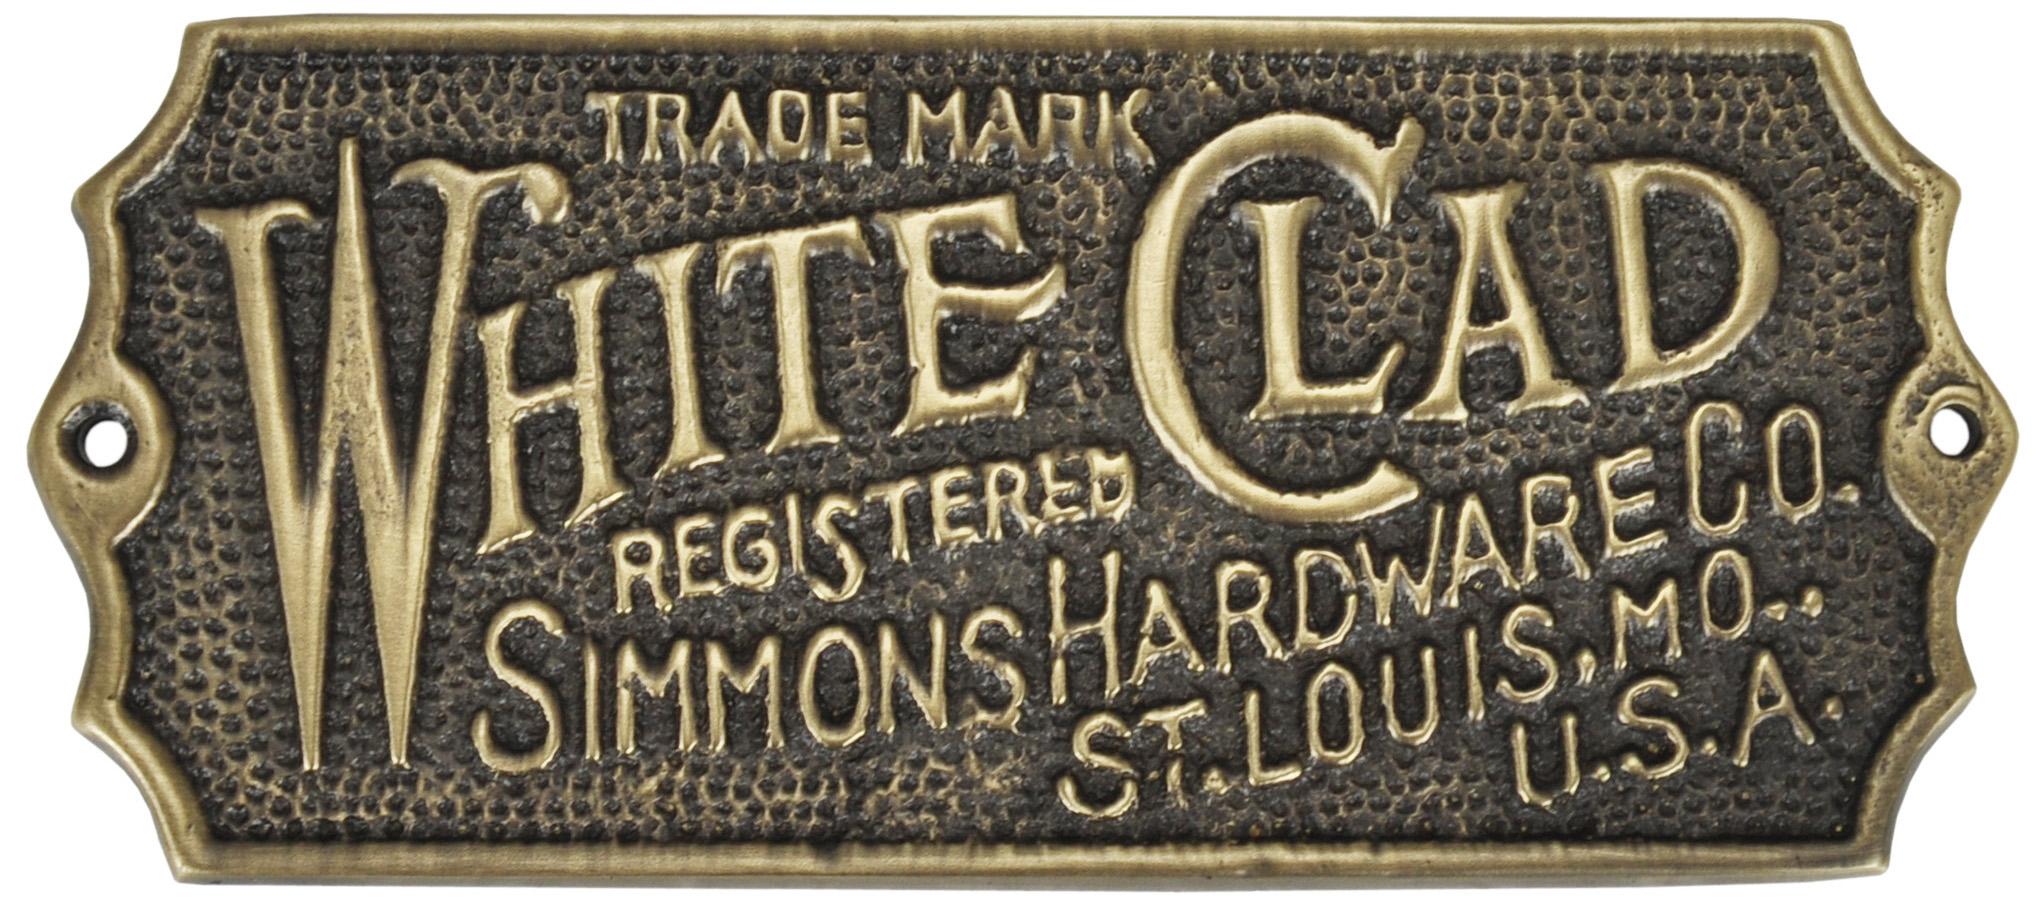 2 Solid Cast Brass White Clad Ice Box Label 